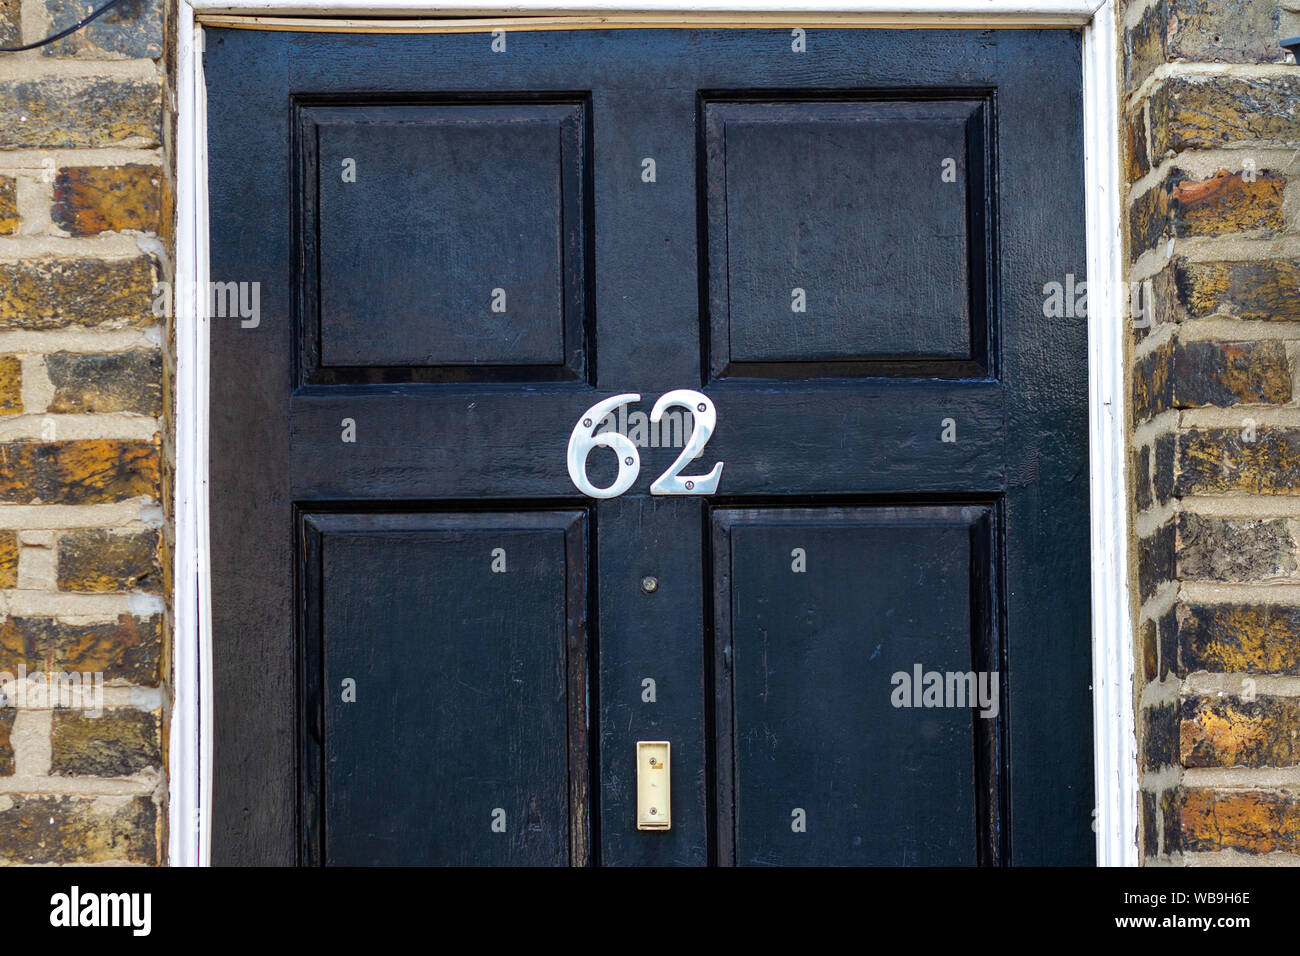 House number 62 on a black wooden front door wih surrounding brick framework Stock Photo